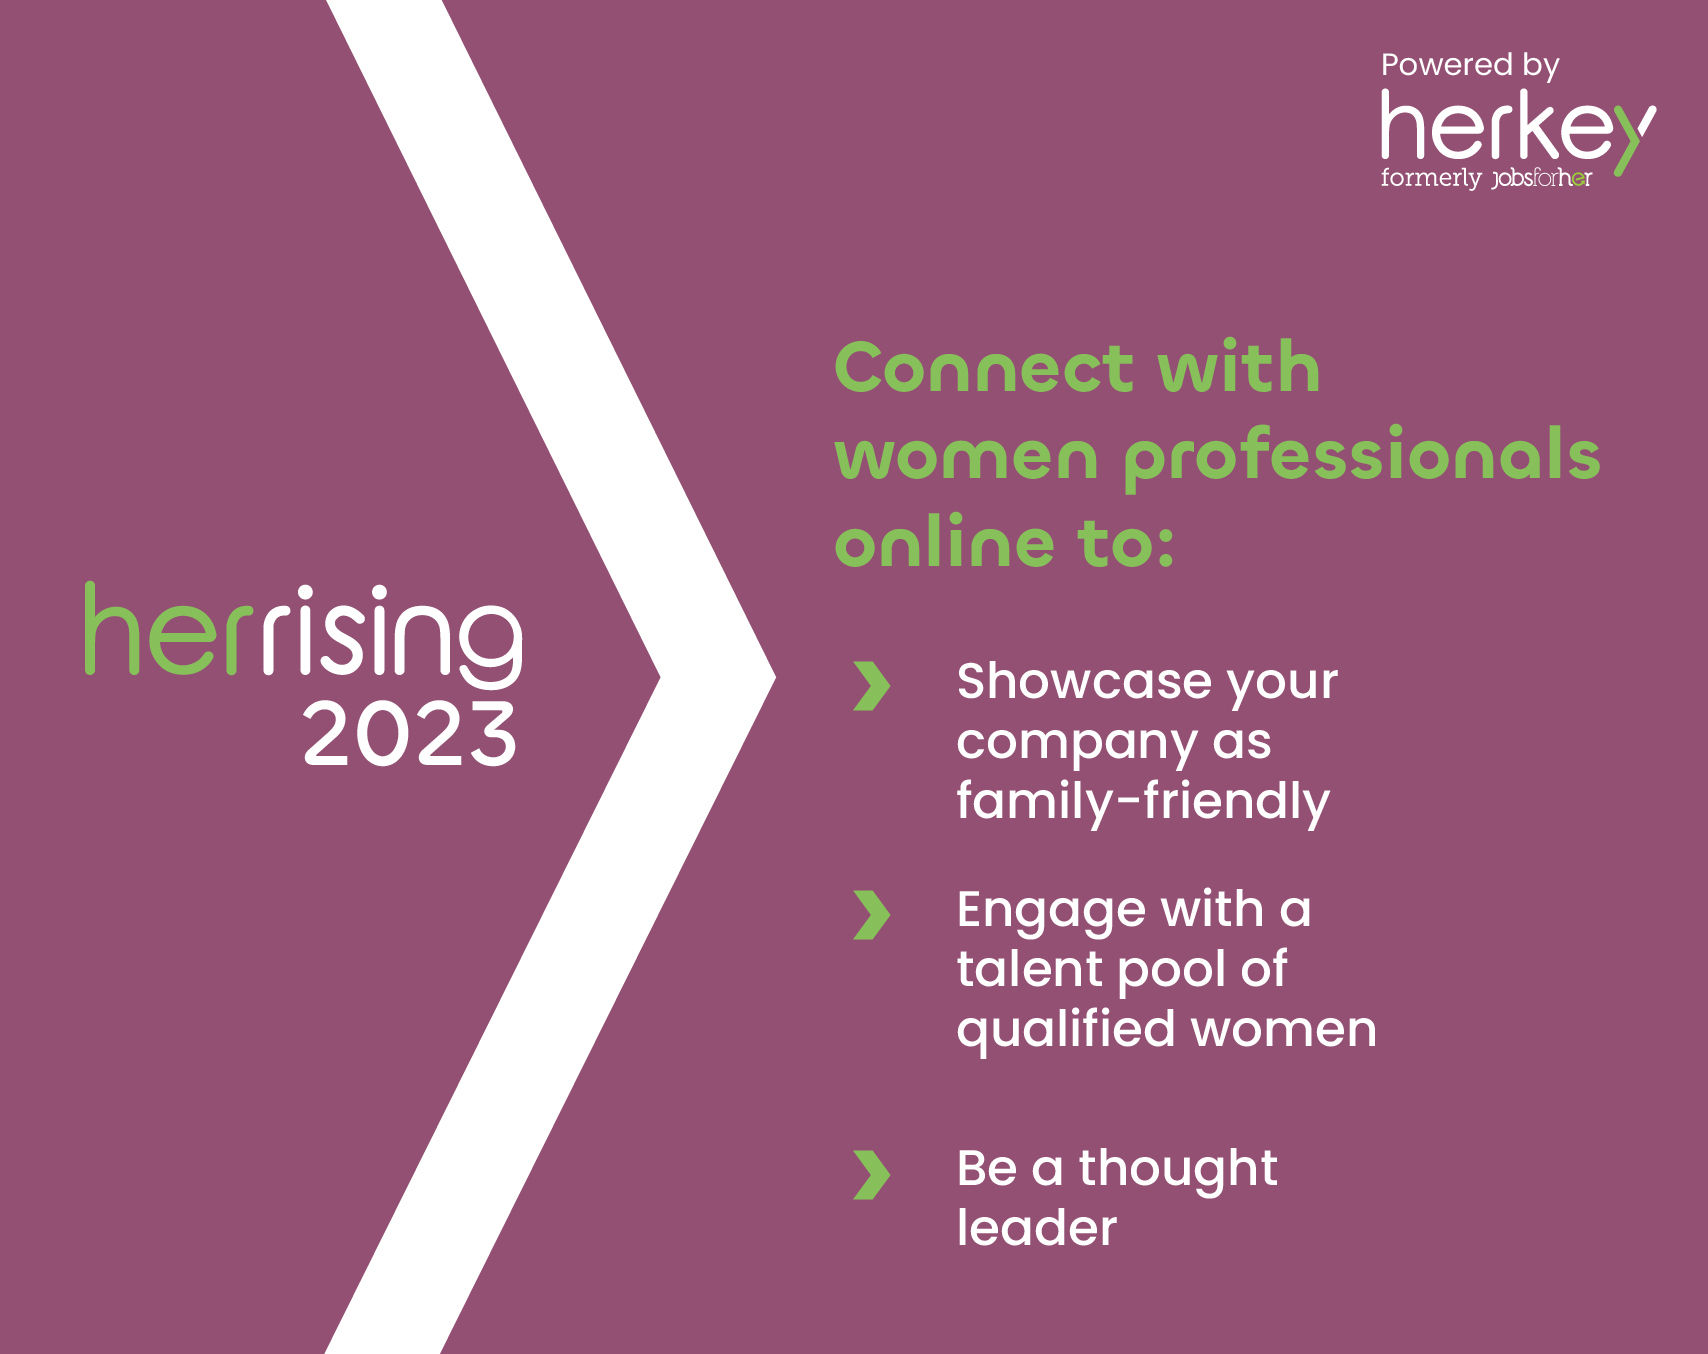 India's Biggest conference and Career Fair for Women Returning to work. RestartHer